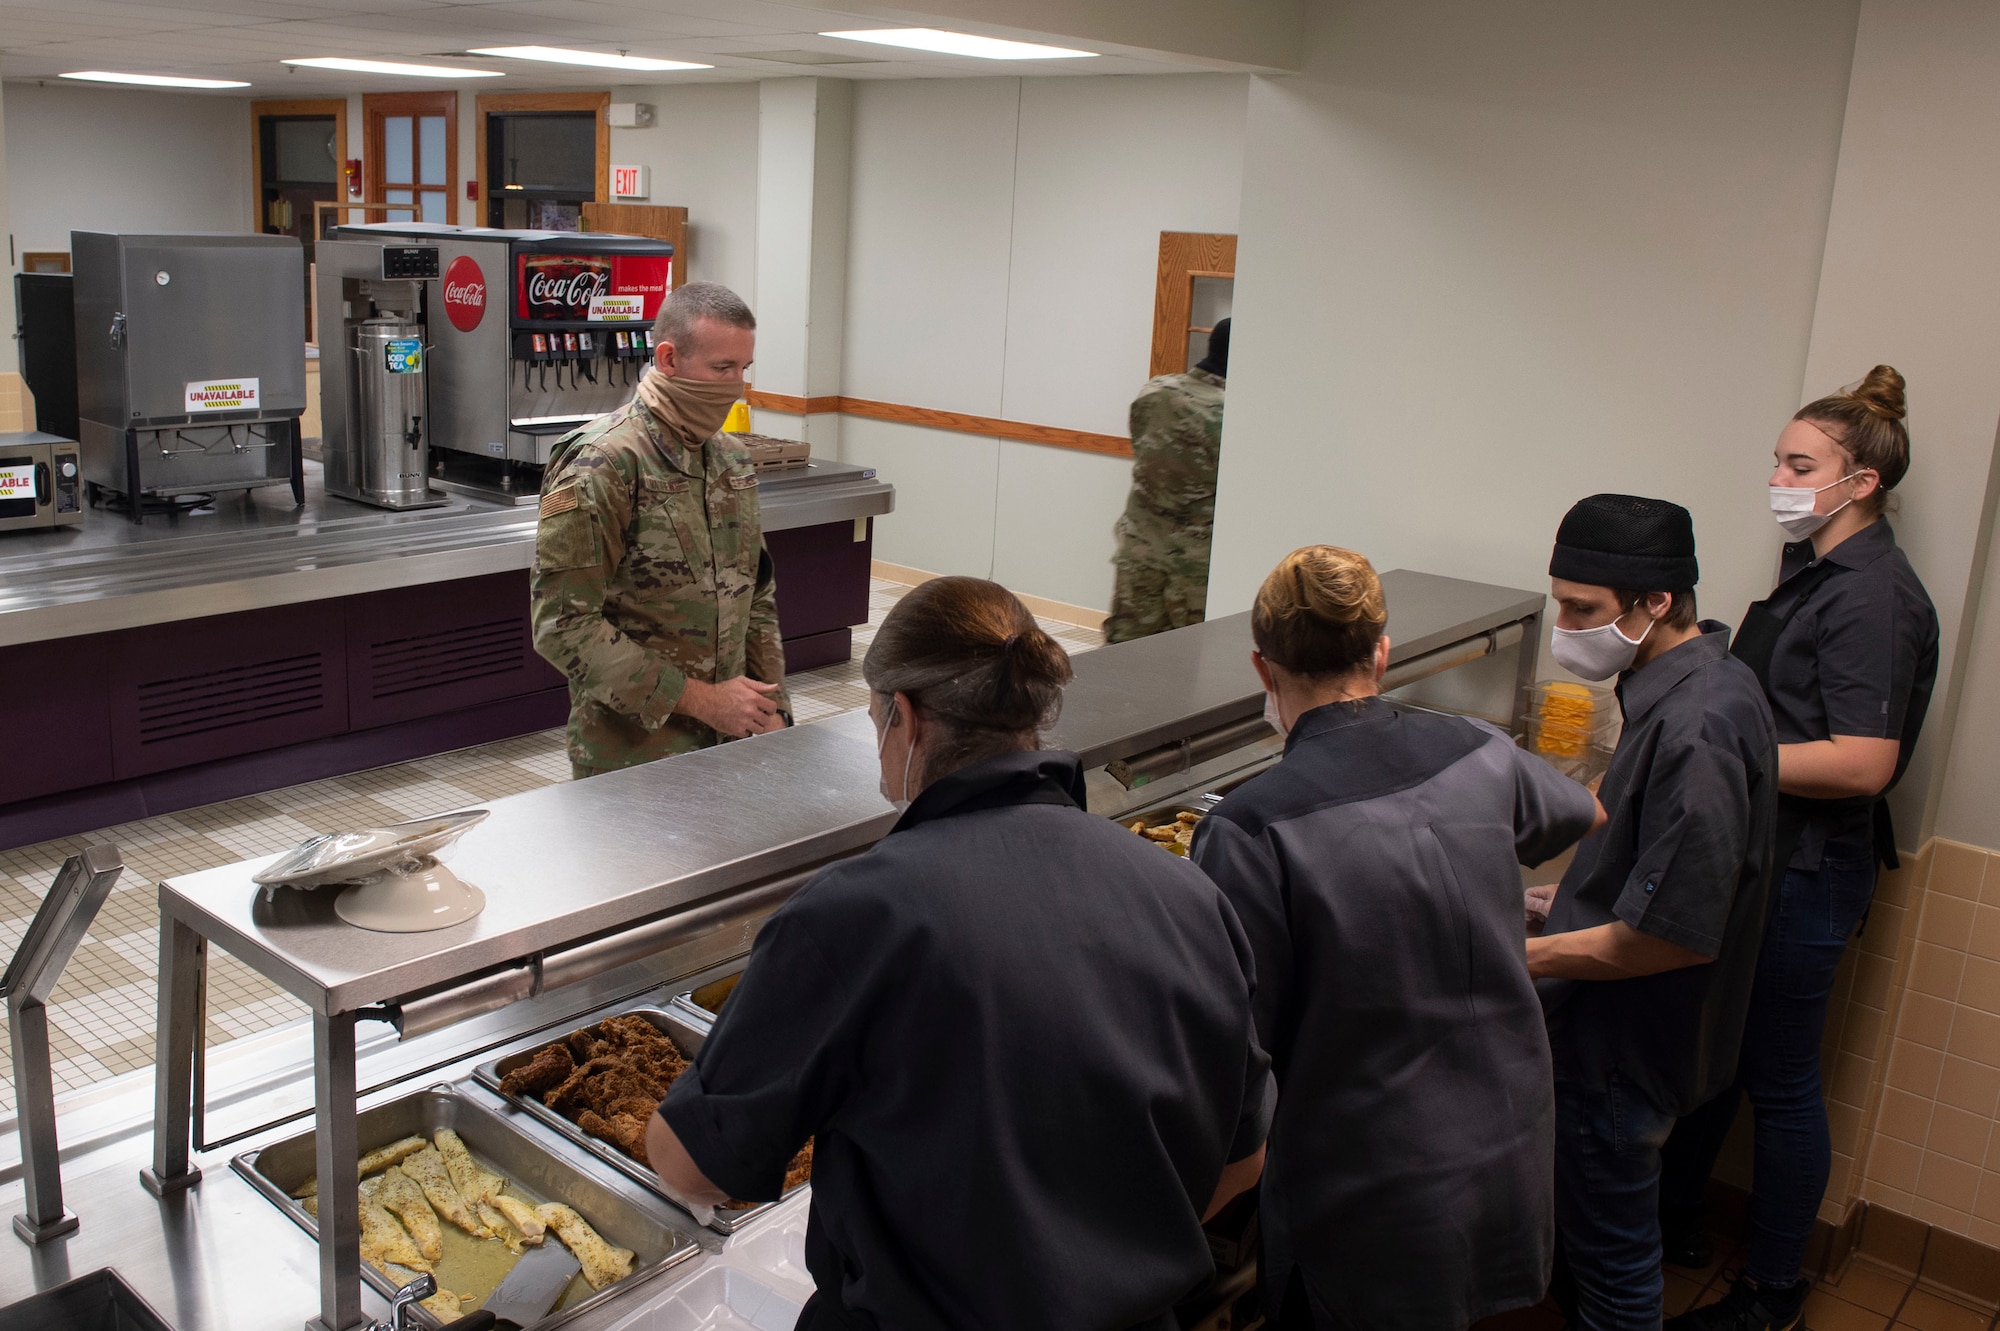 Staff members from the Grissom dining facility serve food during the November unit training facility. Along with social distancing, face coverings, and only allowing carry out during the drill, the dining facility also serves from one line instead of two, ensuring there is a constant flow of traffic and individuals can remain socially distanced. (U.S. Air Force Photo by Tech Sgt. Jami Lancette)